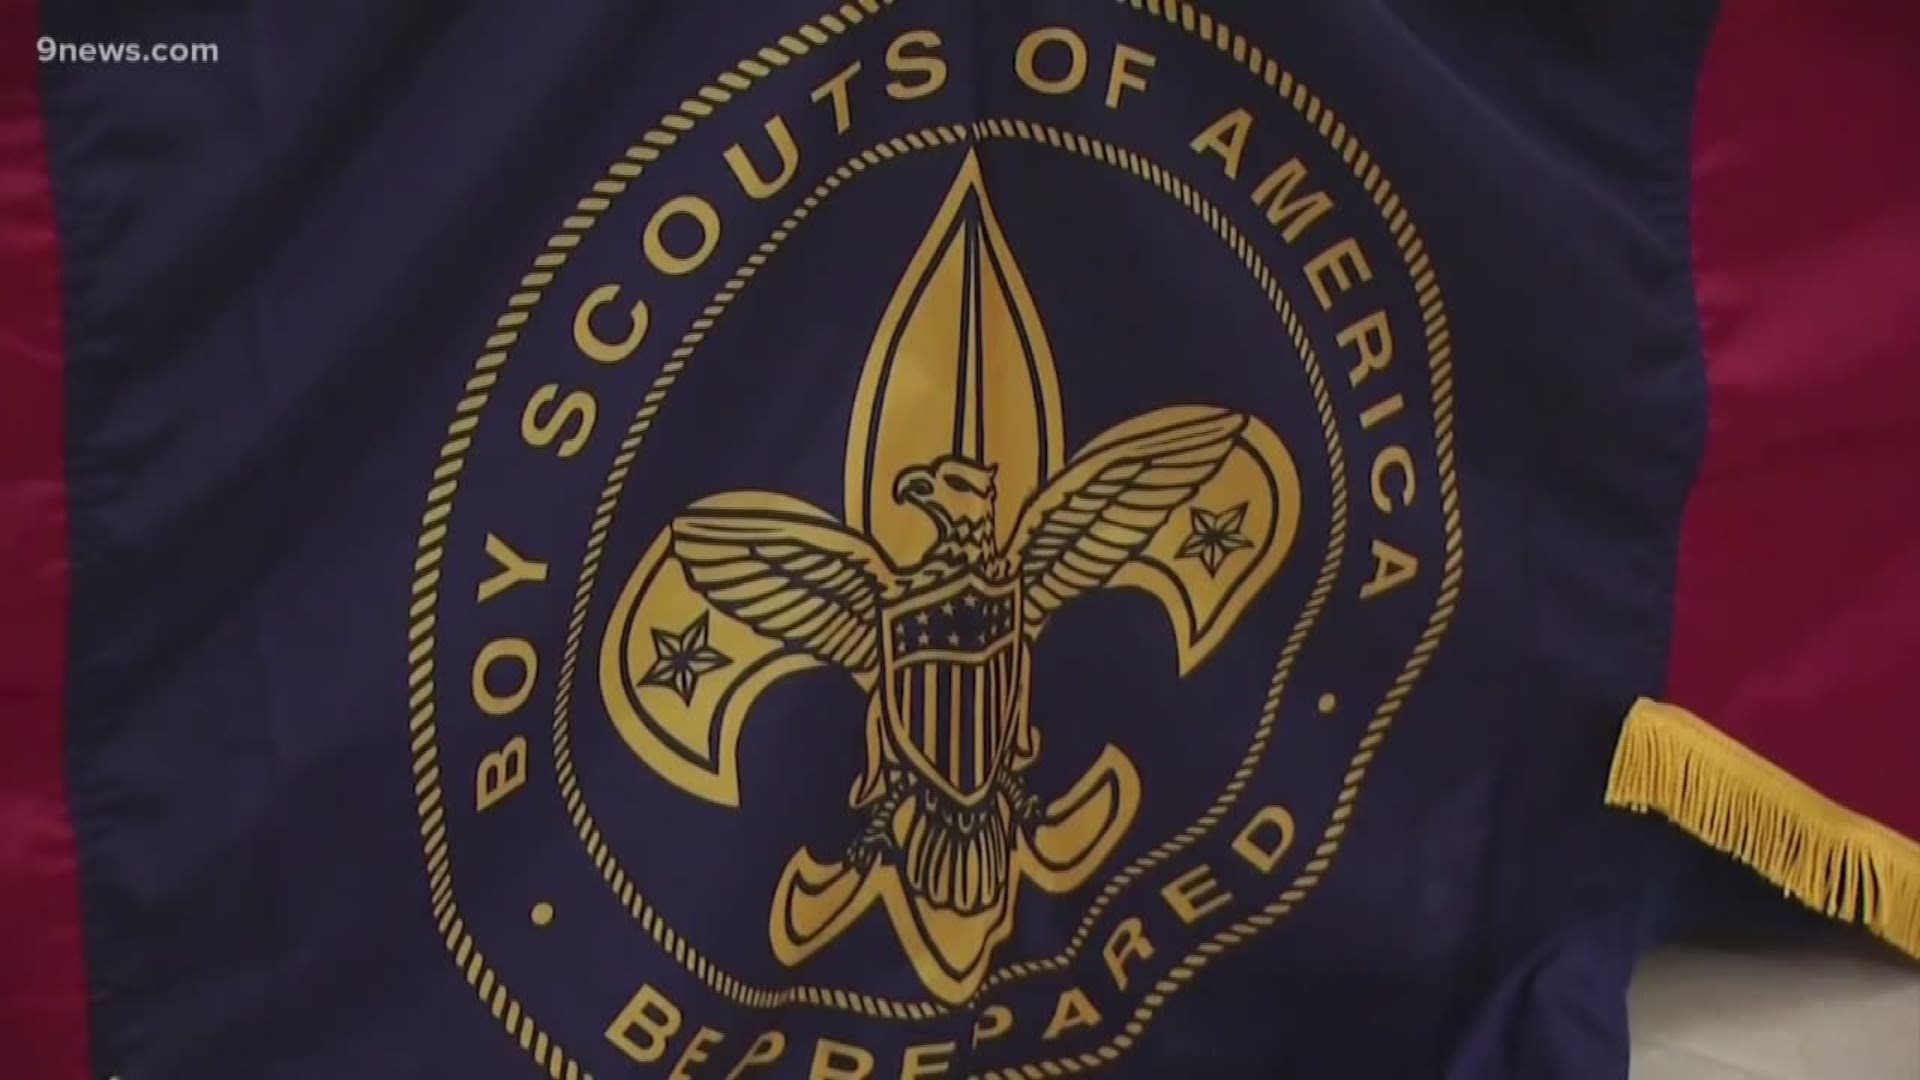 Suit against Boy Scouts says new abuse claims uncovered; 3 identified